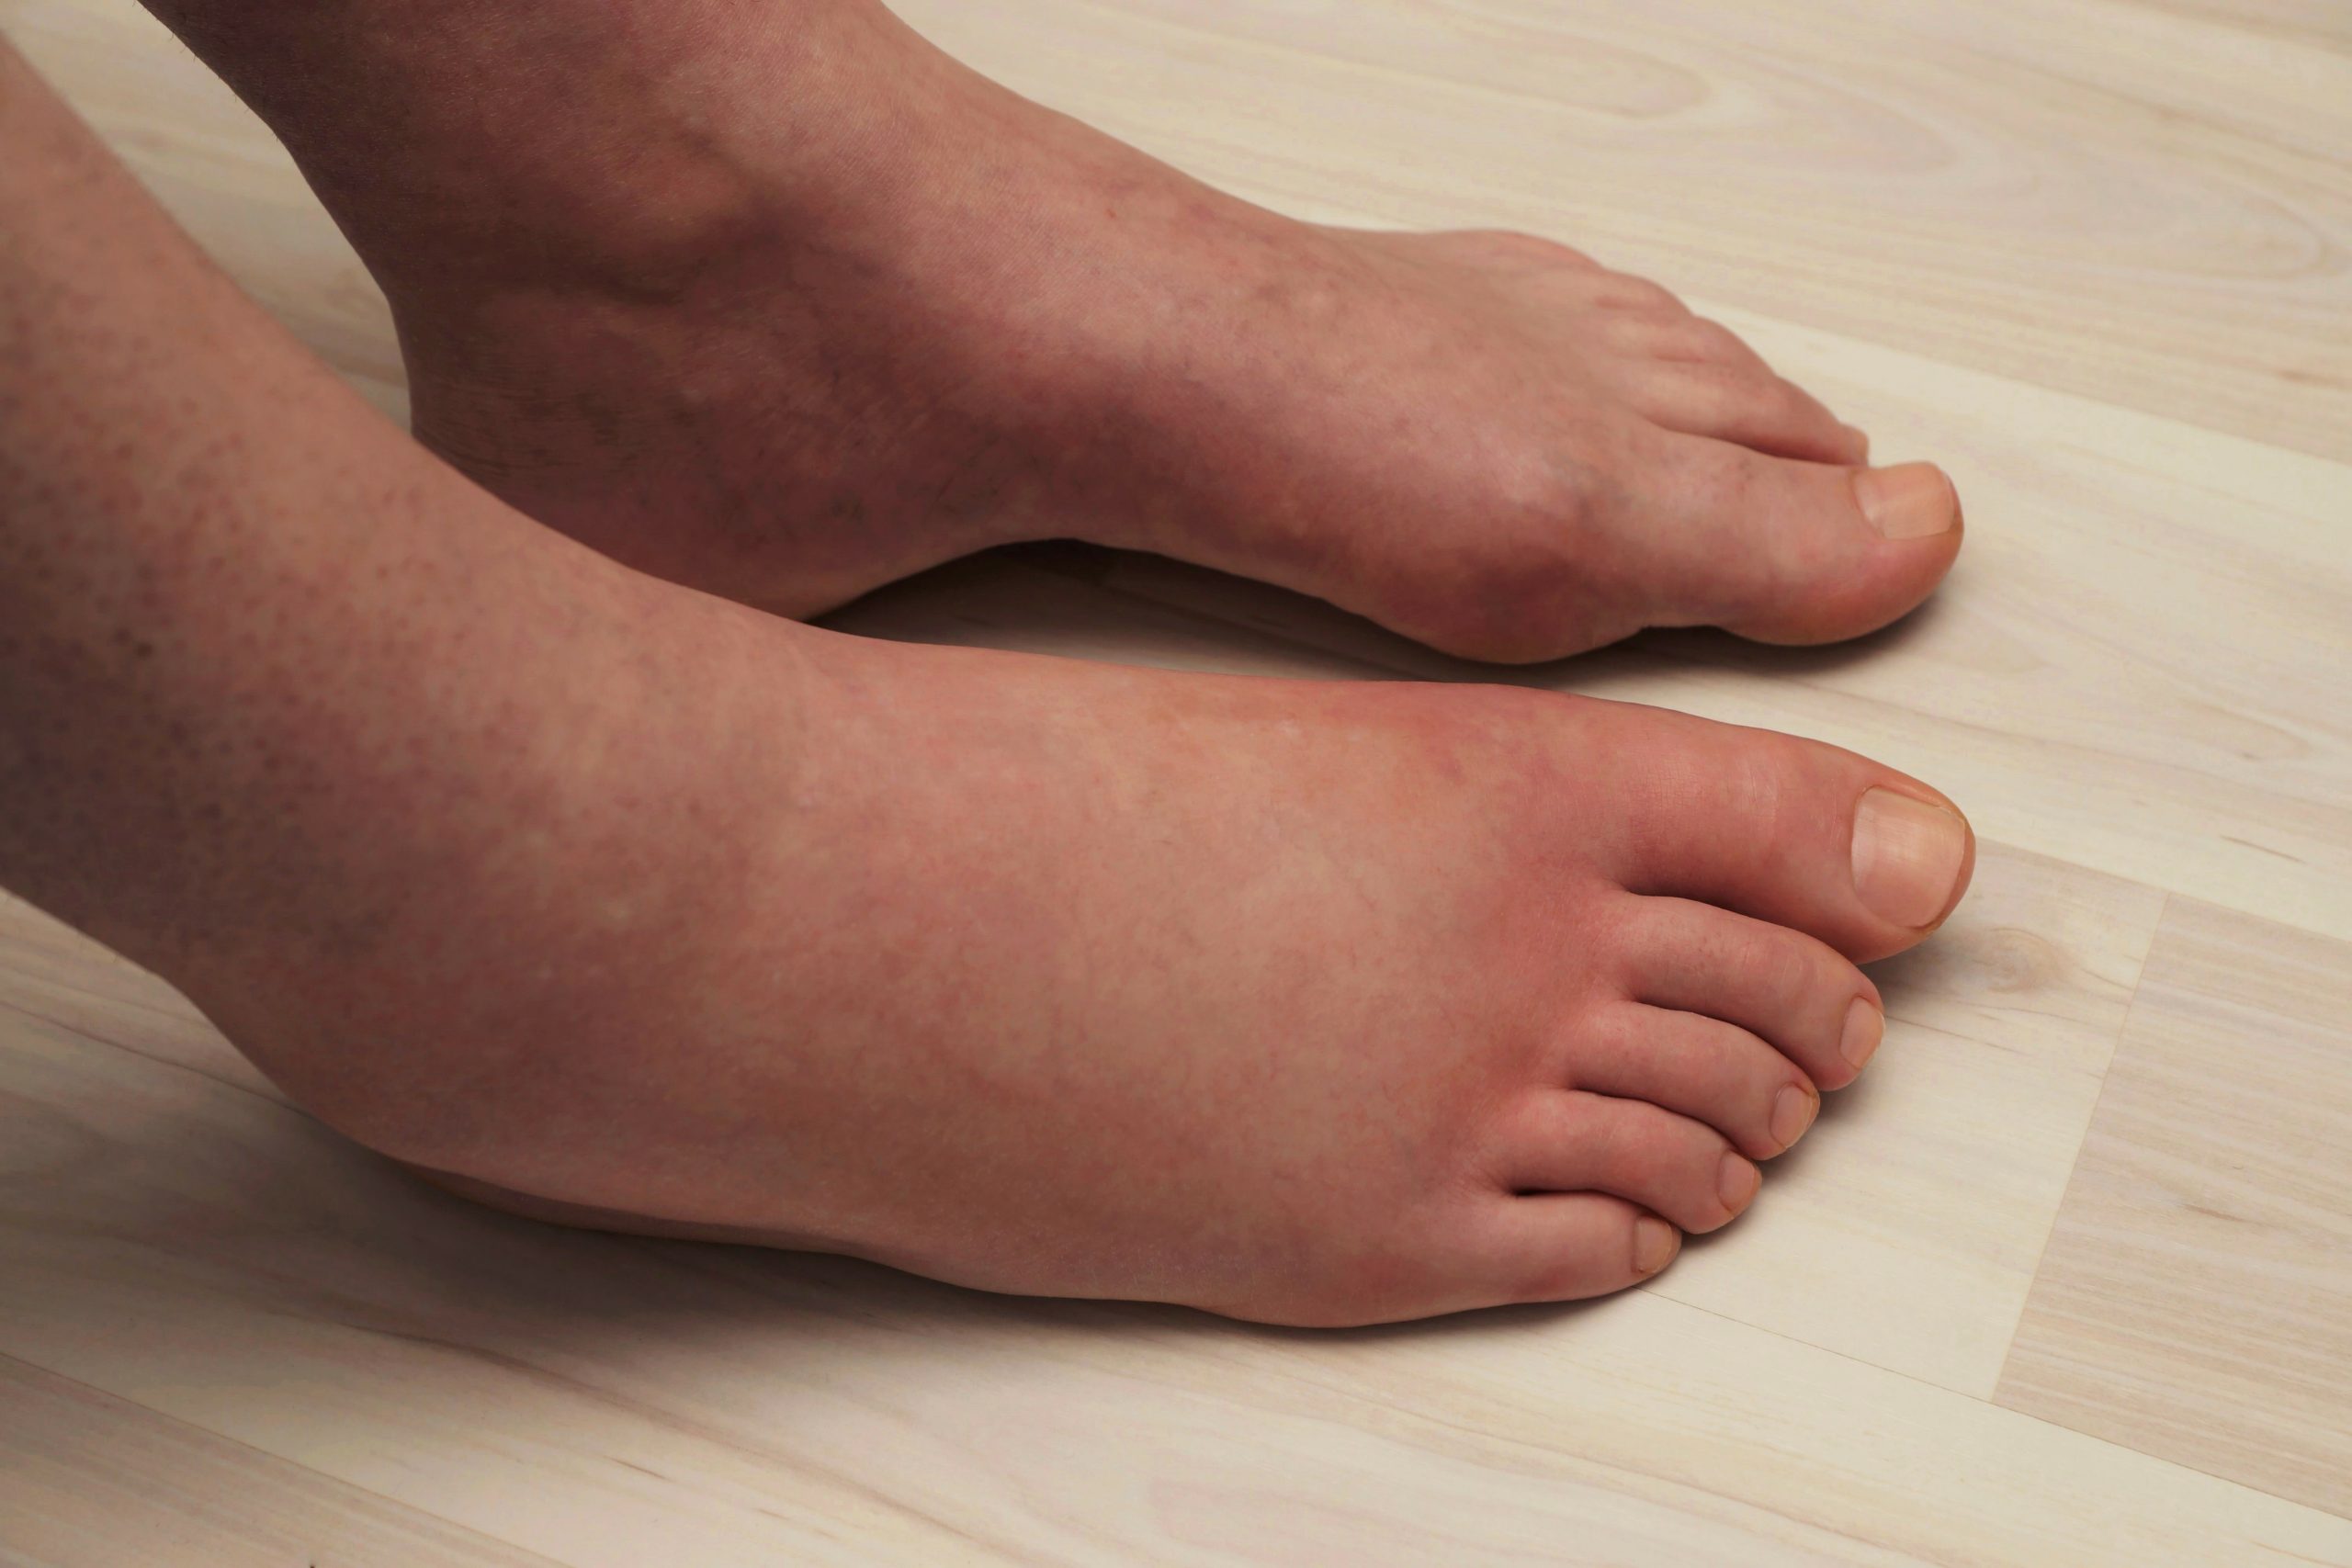 A pair of swollen feet in a pair of comfortable shoes, indicating the importance of finding the right footwear for individuals with swollen feet and ankles.